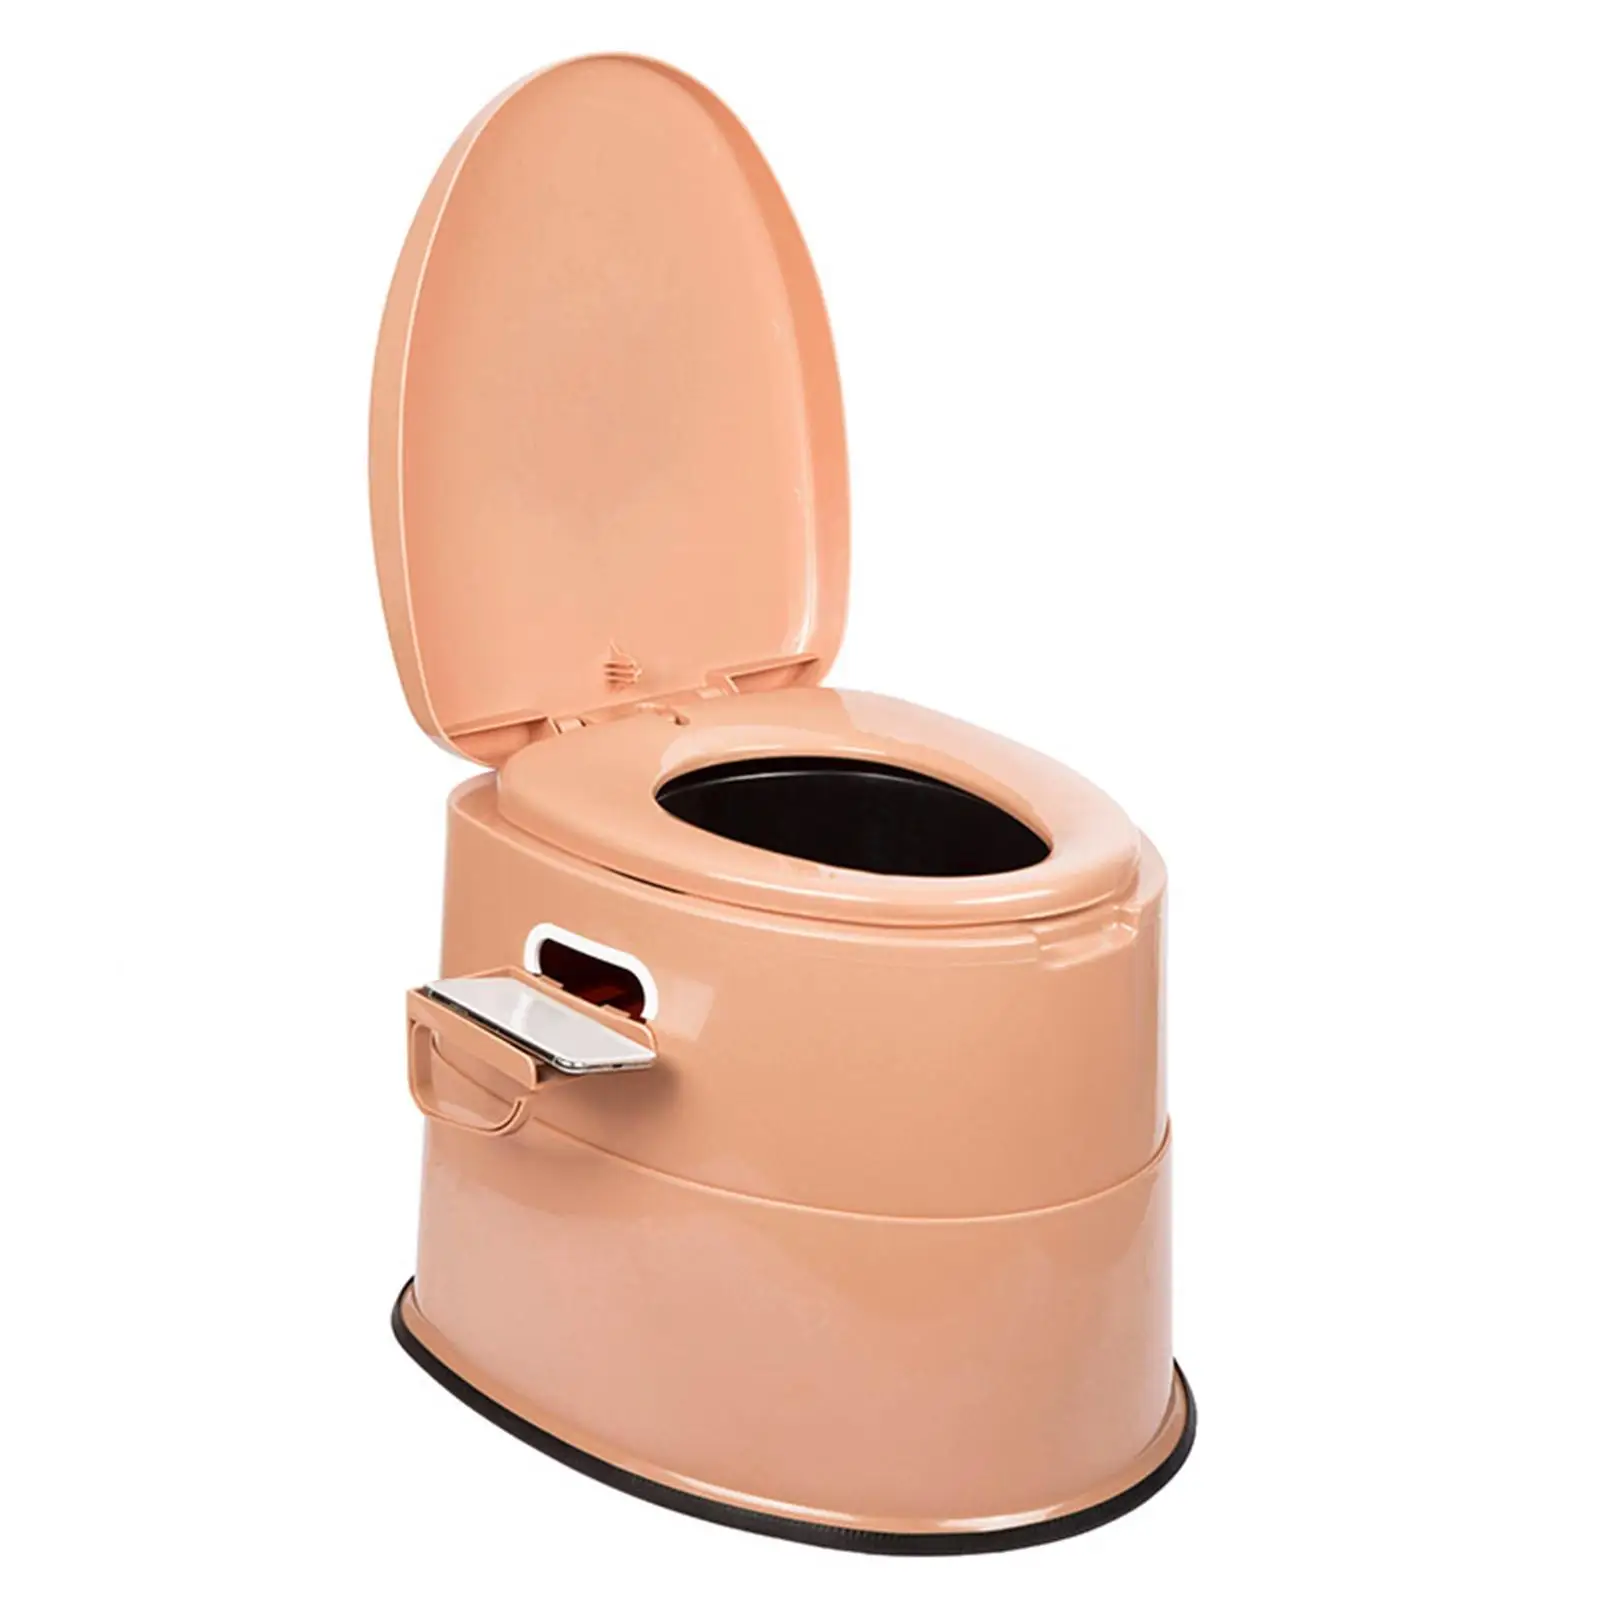 Portable Toilet for Adults Lightweight Sturdy Outdoor Potty Camping Toilet for Living Room Outdoor Camping Boat RV